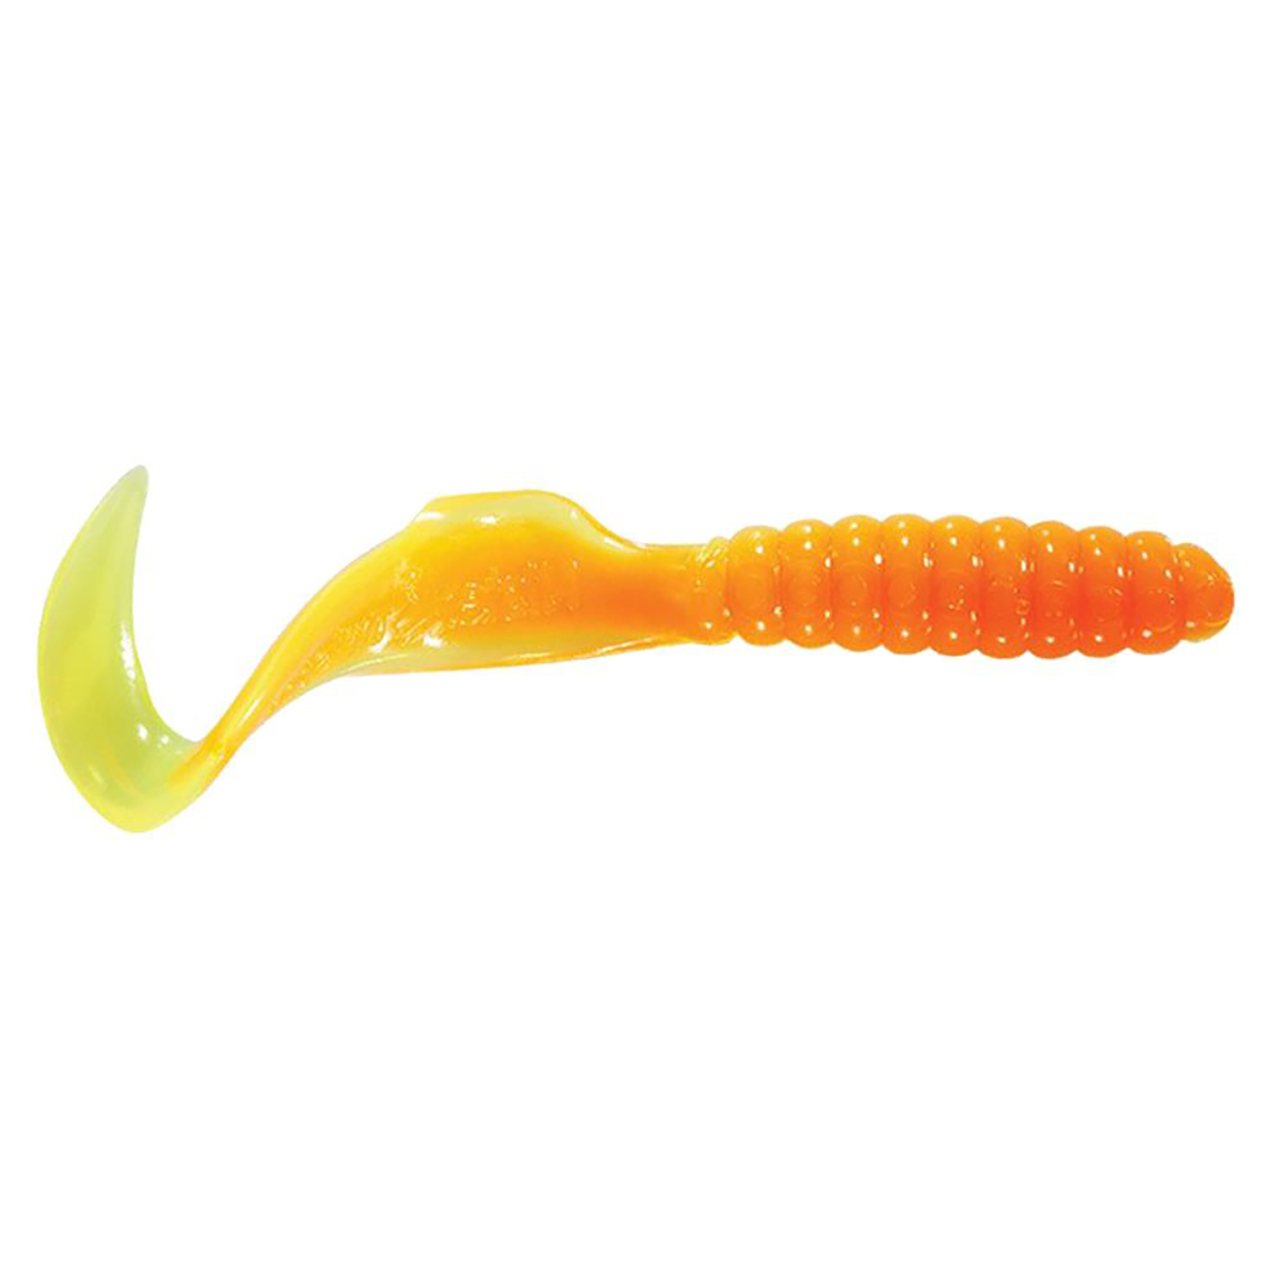 Mister Twister Curly Tail Grubs Chartreuse/Orange Core; 2 in.